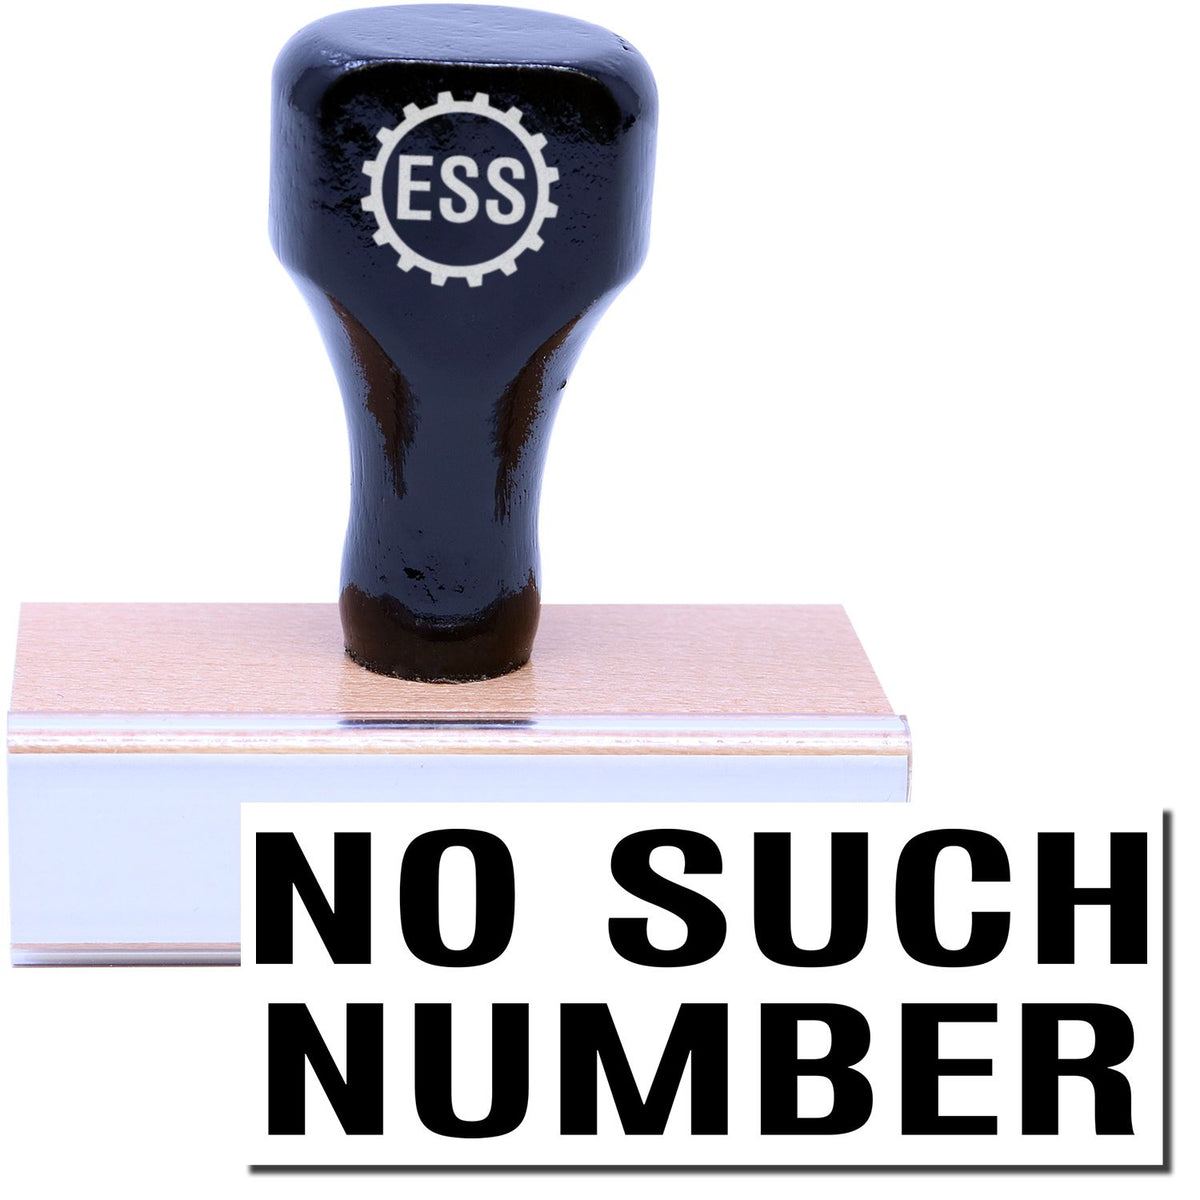 A stock office rubber stamp with a stamped image showing how the text &quot;NO SUCH NUMBER&quot; in a large font is displayed after stamping.